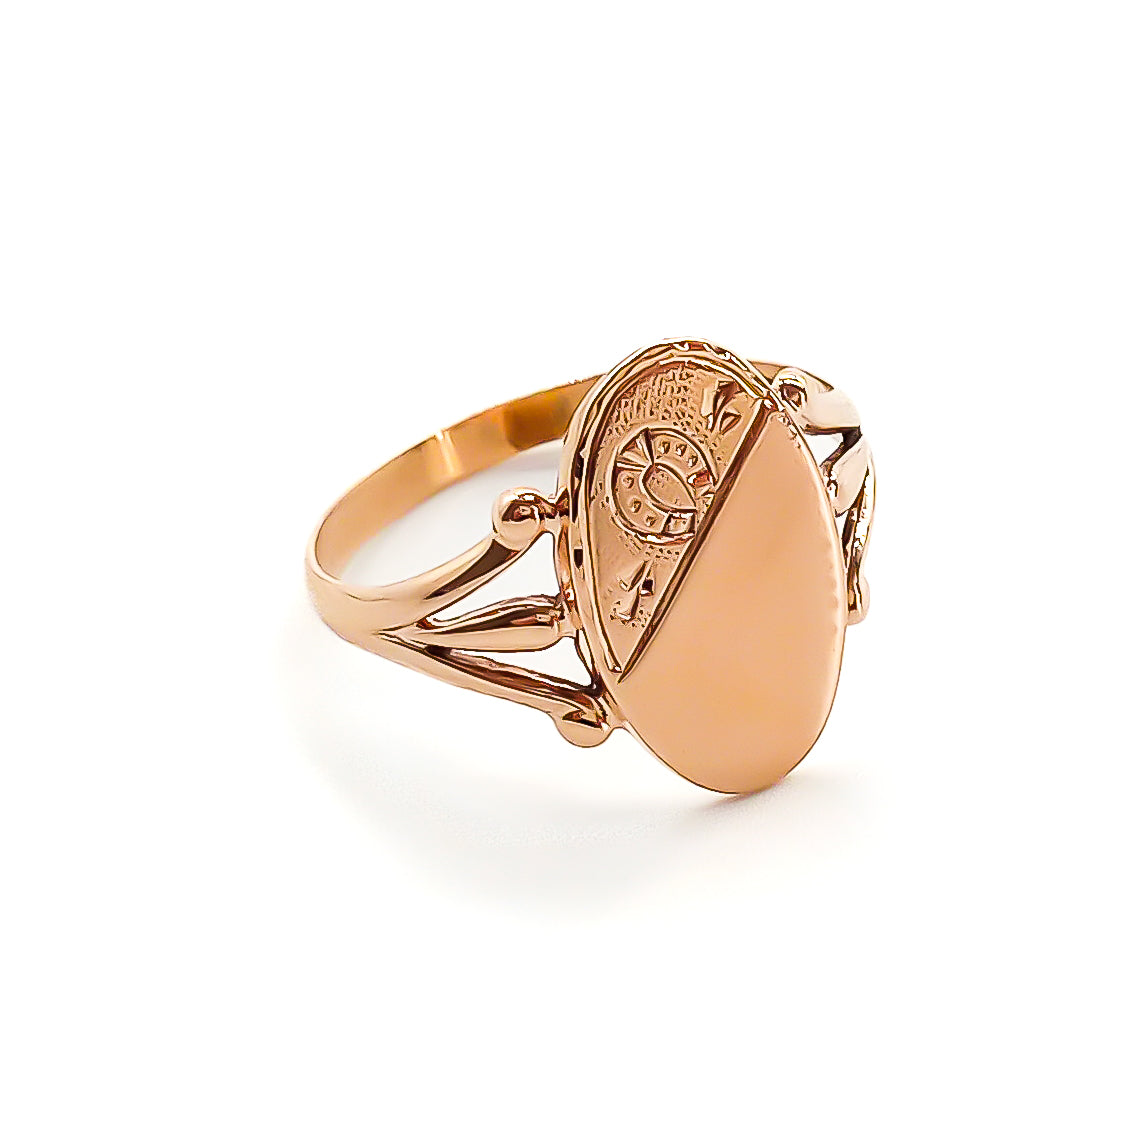 Lovely  9ct rose gold signet ring with horseshoe motif, ideal to be engraved. Circa 1940’s